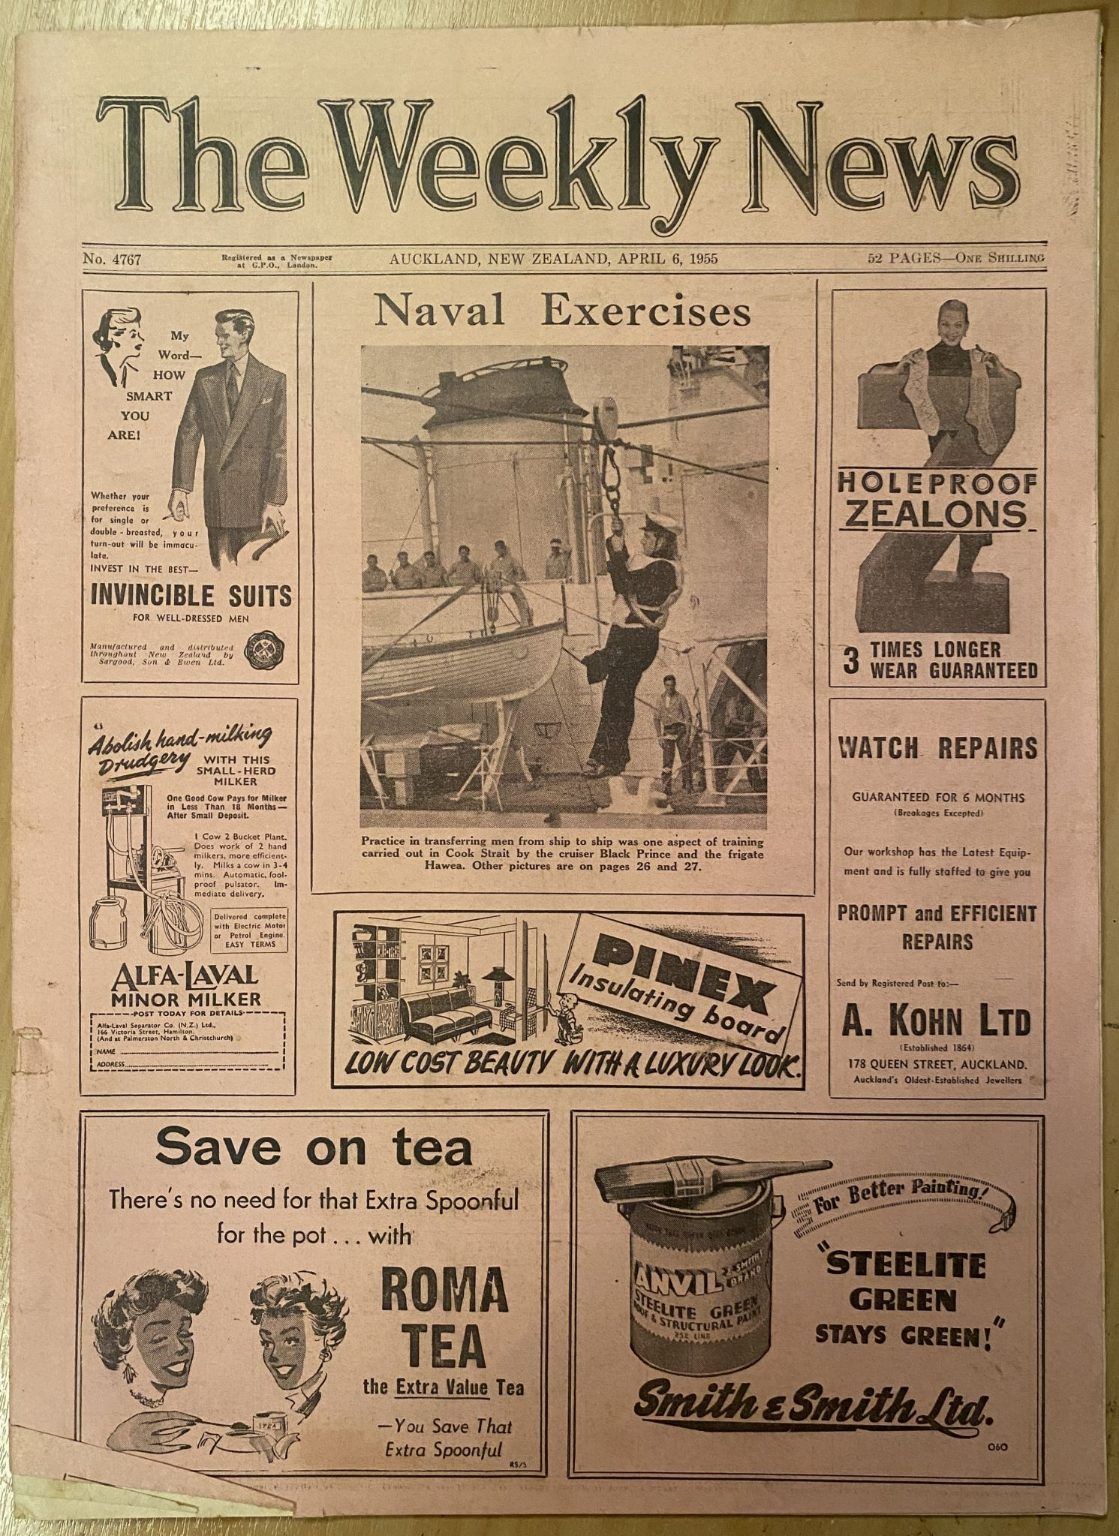 OLD NEWSPAPER: The Weekly News - No. 4767, 6 April 1955